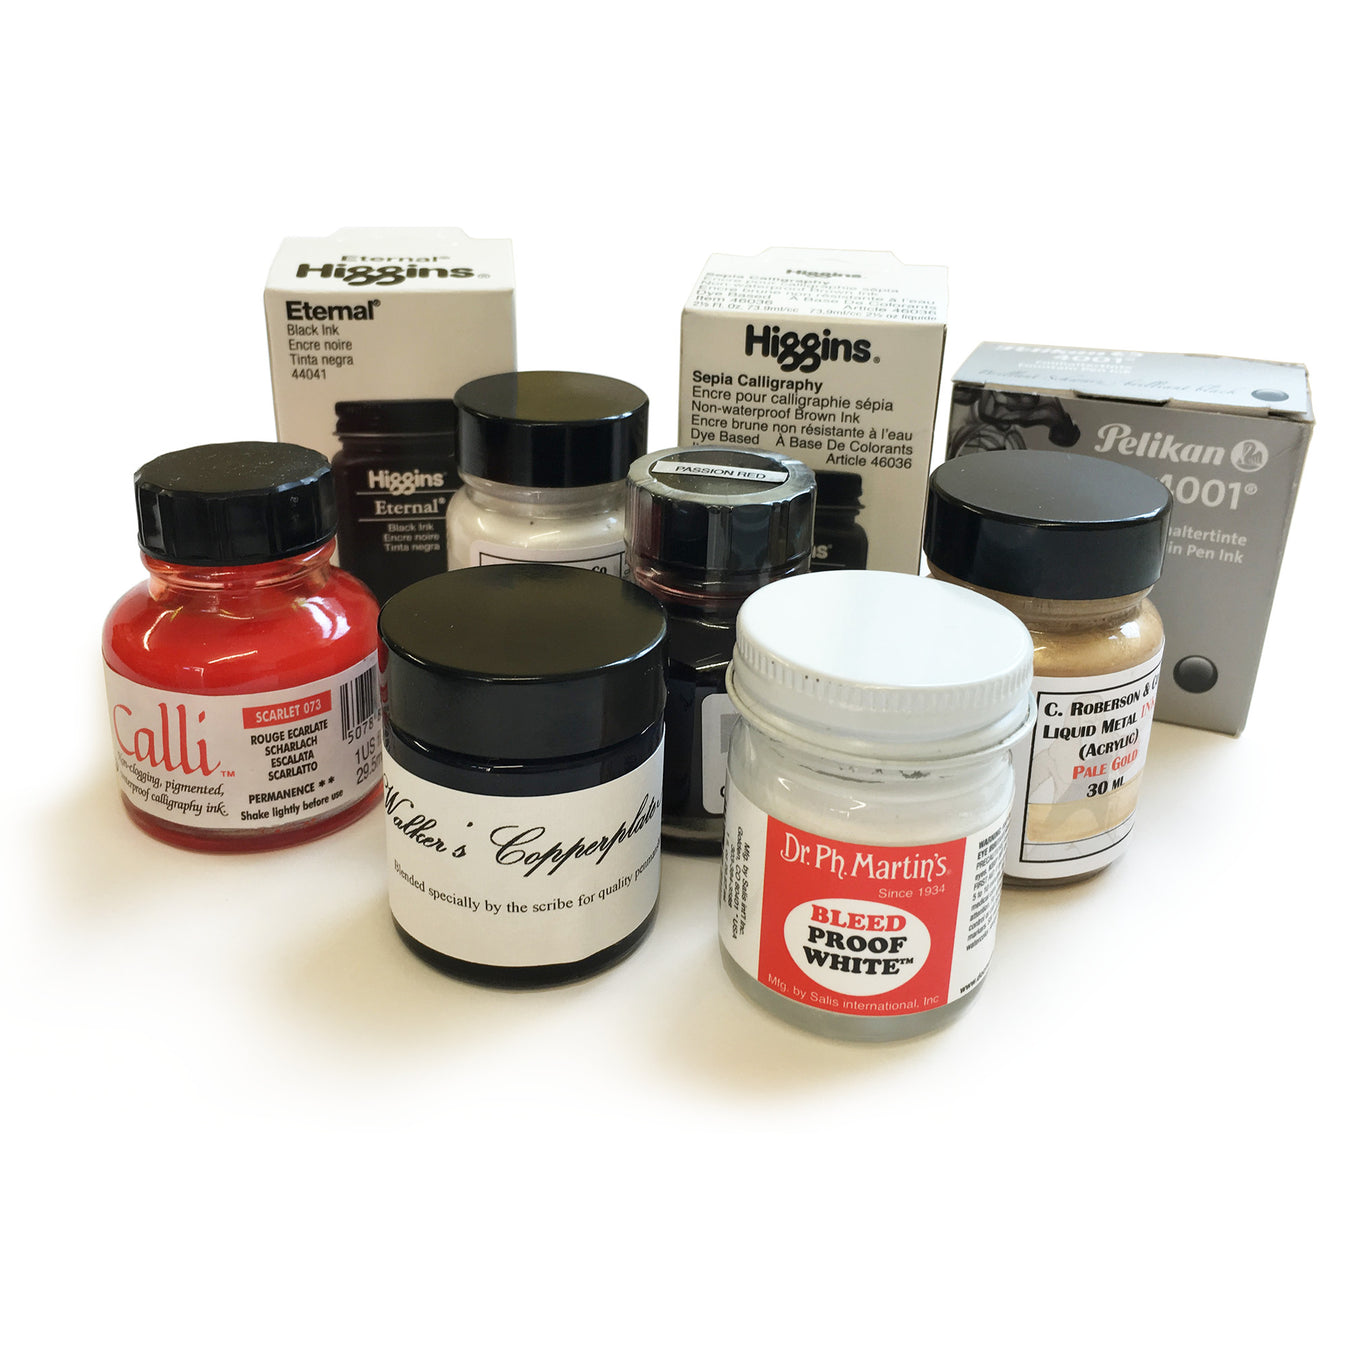 A Selection of Calligraphy Inks from Scribblers Calligraphy